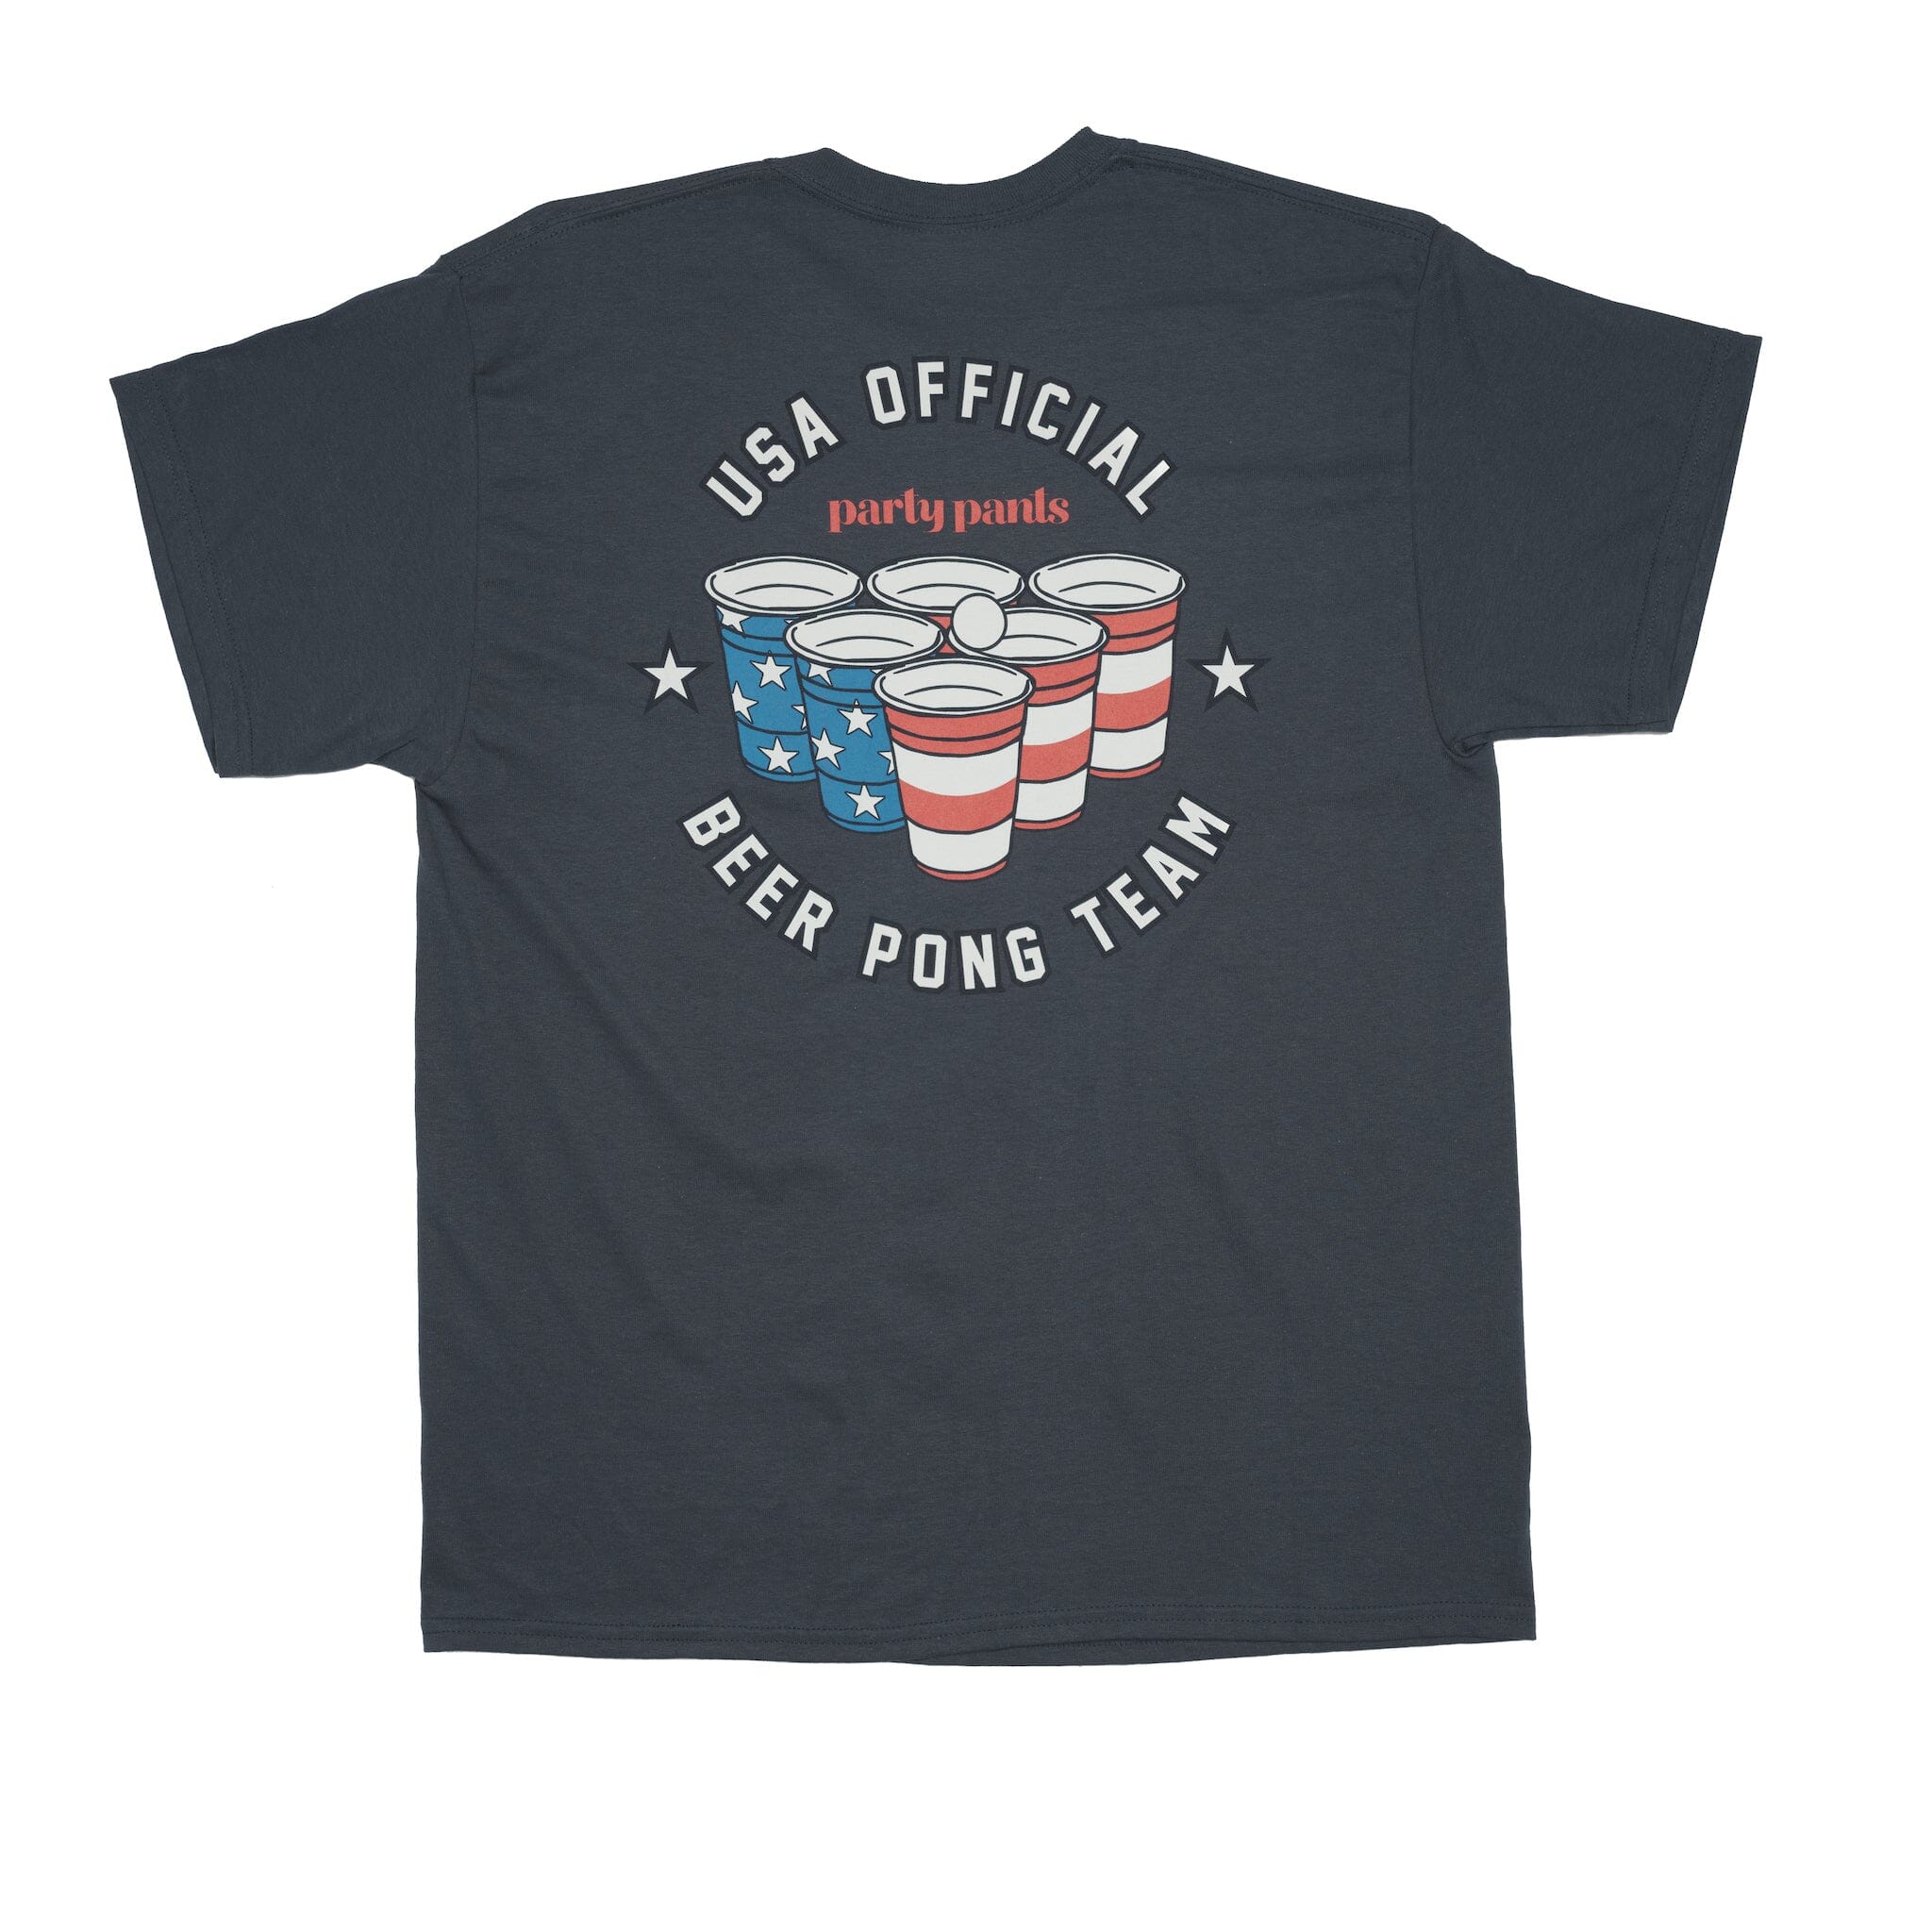 BEER PONG TEAM T-SHIRT - BLUE DUSK TEE PARTY PANTS 